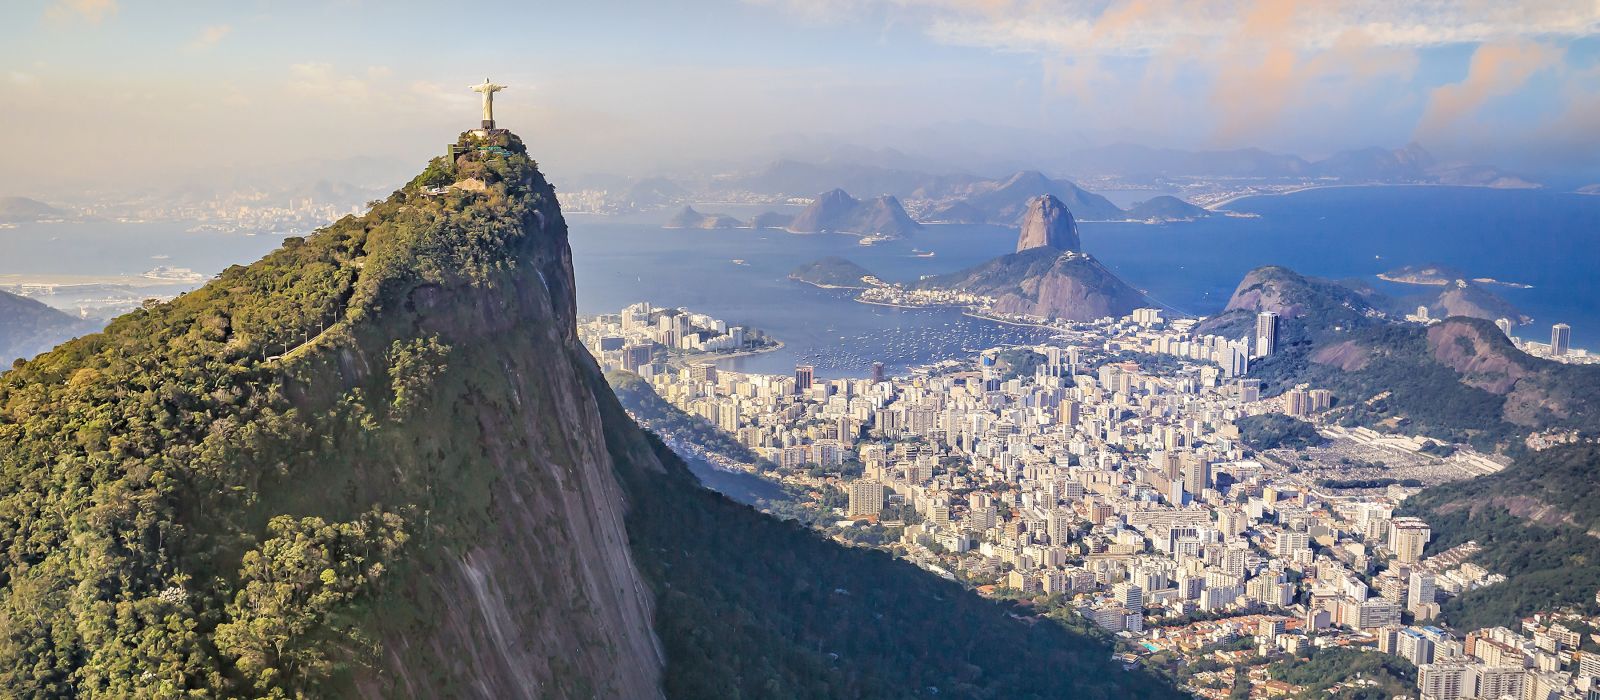 15 Geography Quiz Questions To Test Every Corner Of Your Mind Enchanting Travels South America Brazil 5